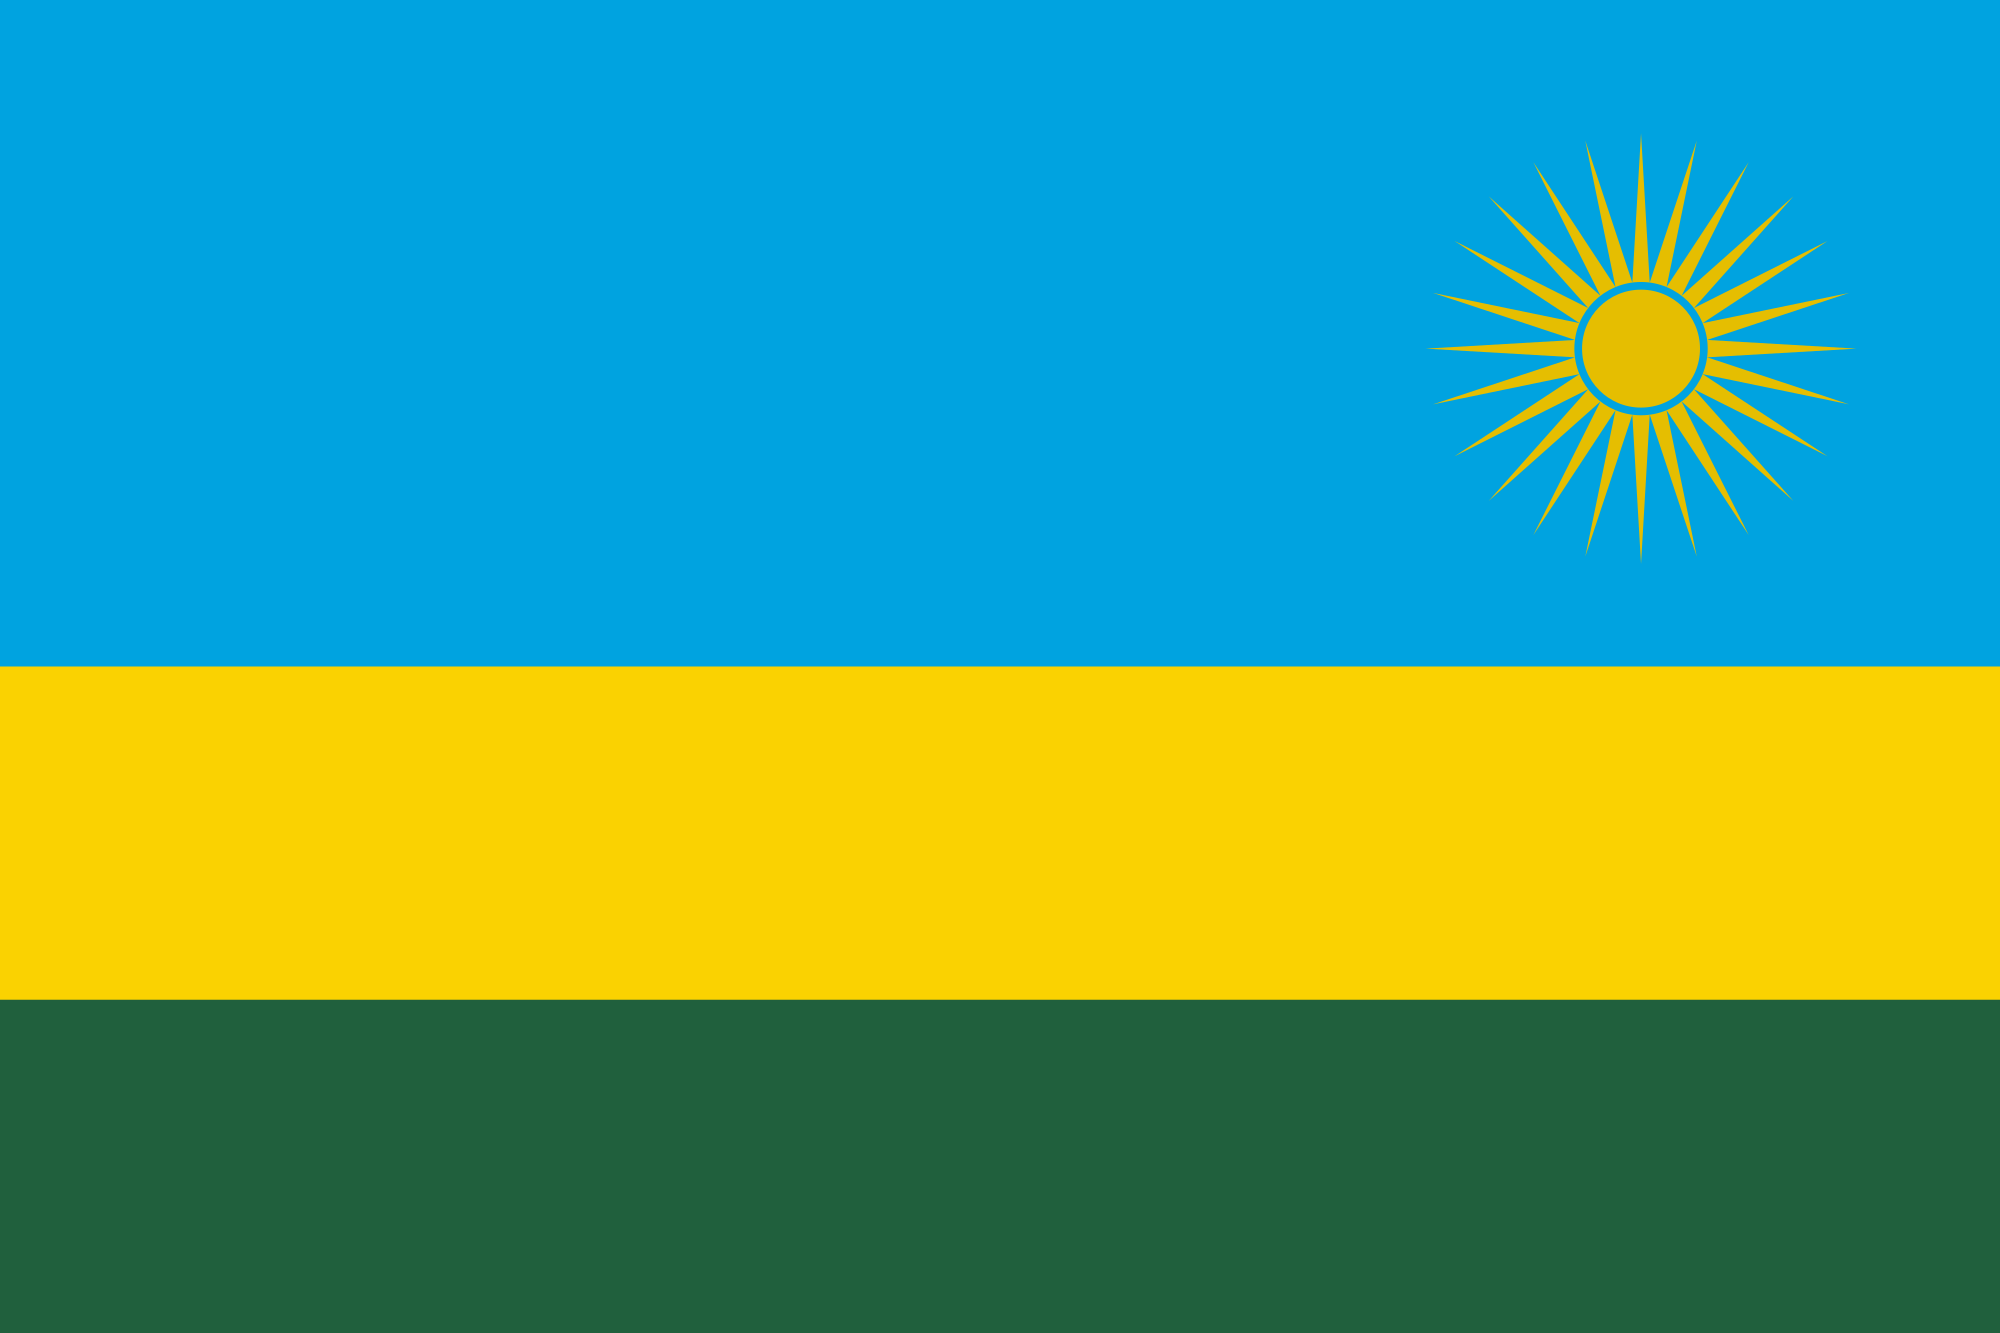 Flag of Rwanda consisting of three horizontal stripes in sky blue, yellow, and green, with a yellow sun on the right side of the blue stripe.